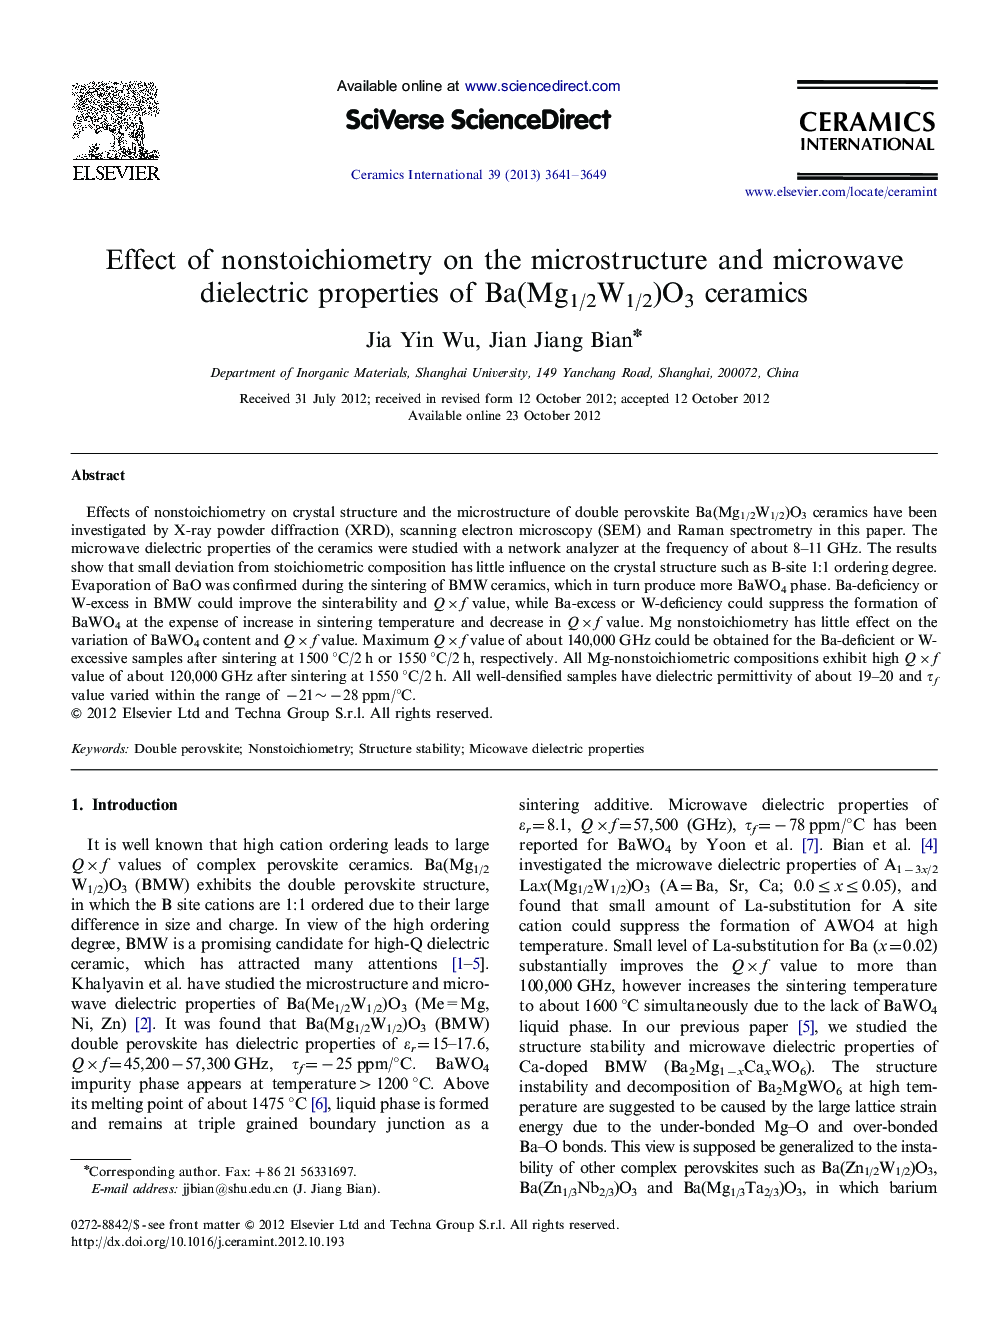 Effect of nonstoichiometry on the microstructure and microwave dielectric properties of Ba(Mg1/2W1/2)O3 ceramics